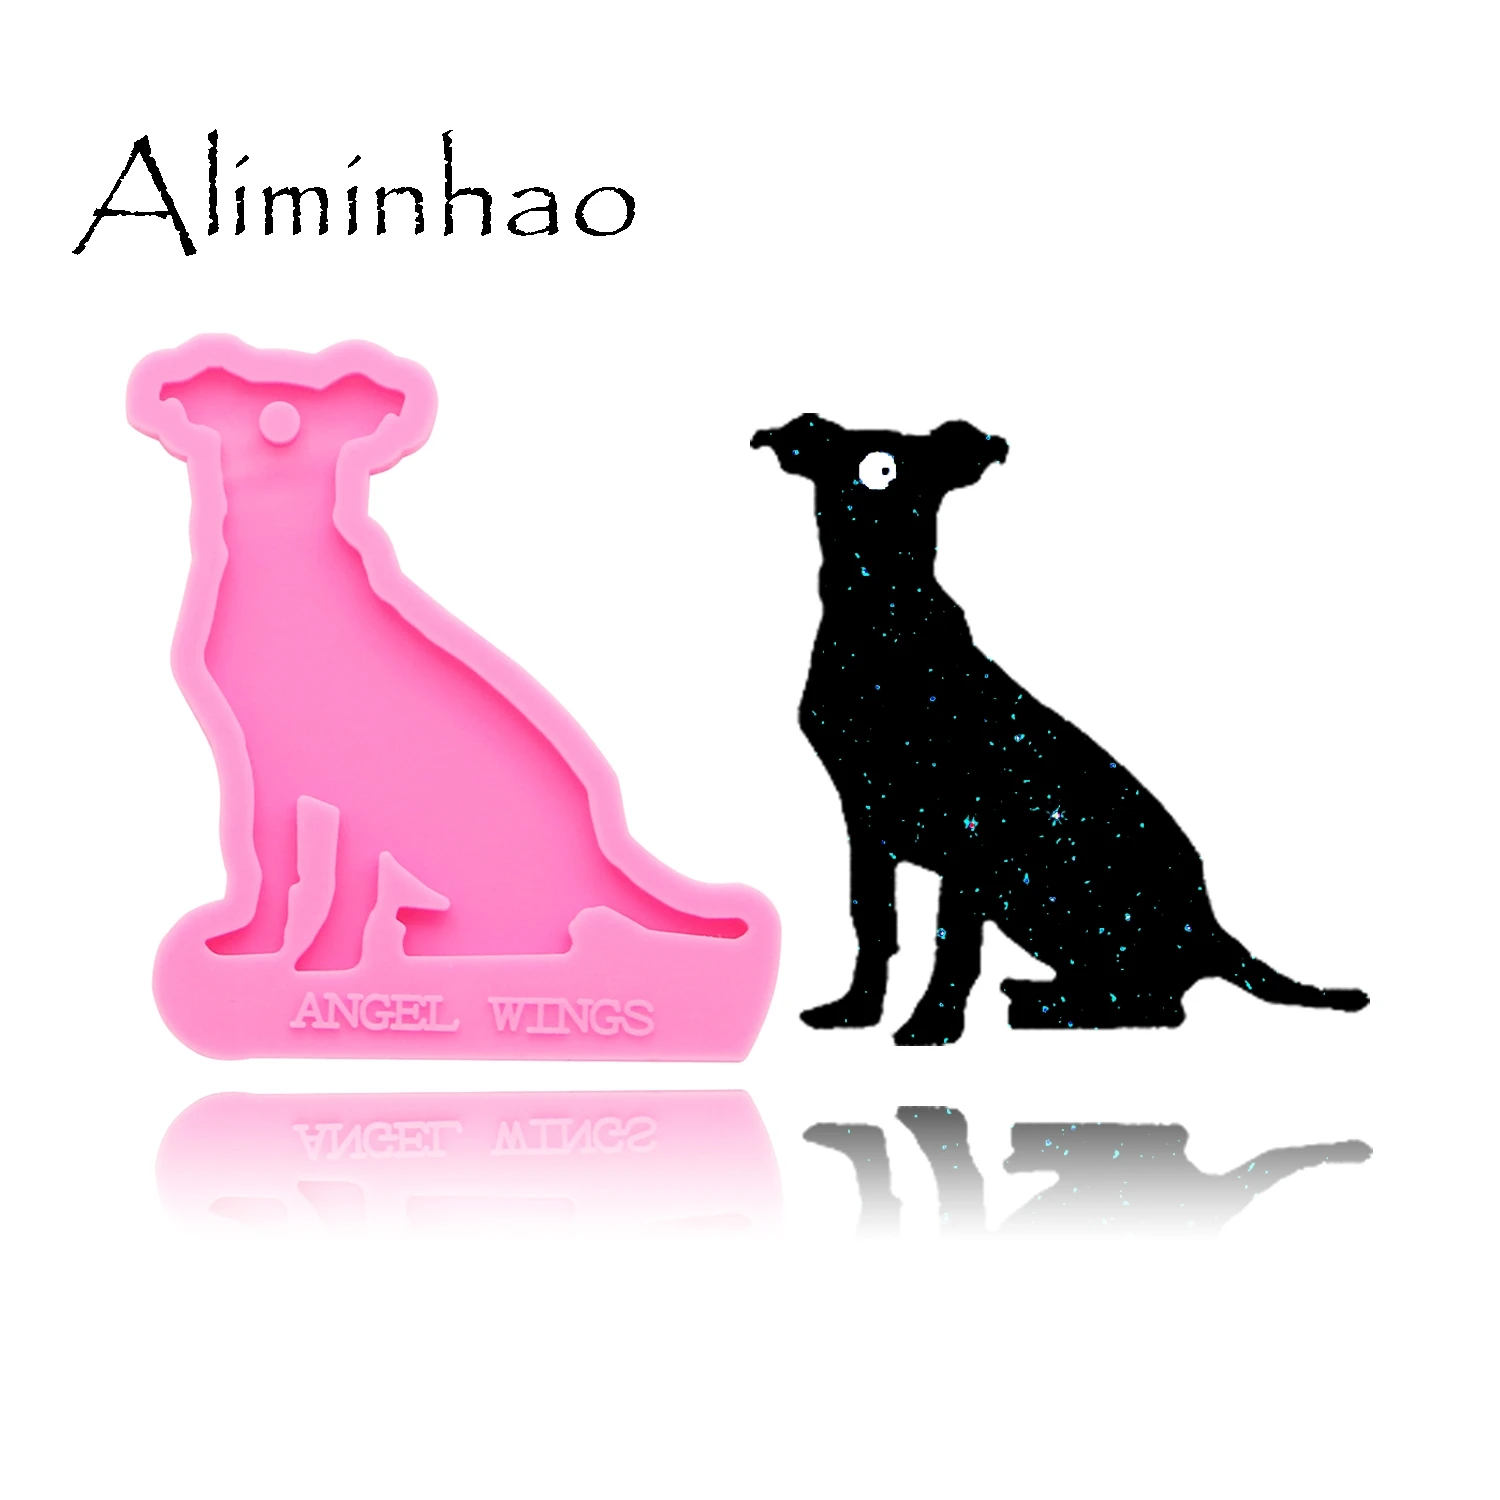 https://ae01.alicdn.com/kf/Hc7ffc04a98ab46a491a1a12f321979a35/DY0174-Shiny-dog-6-different-shapes-Silicone-Molds-DIY-epoxy-mould-silicon-Resin-Crafting-molds-for.jpg